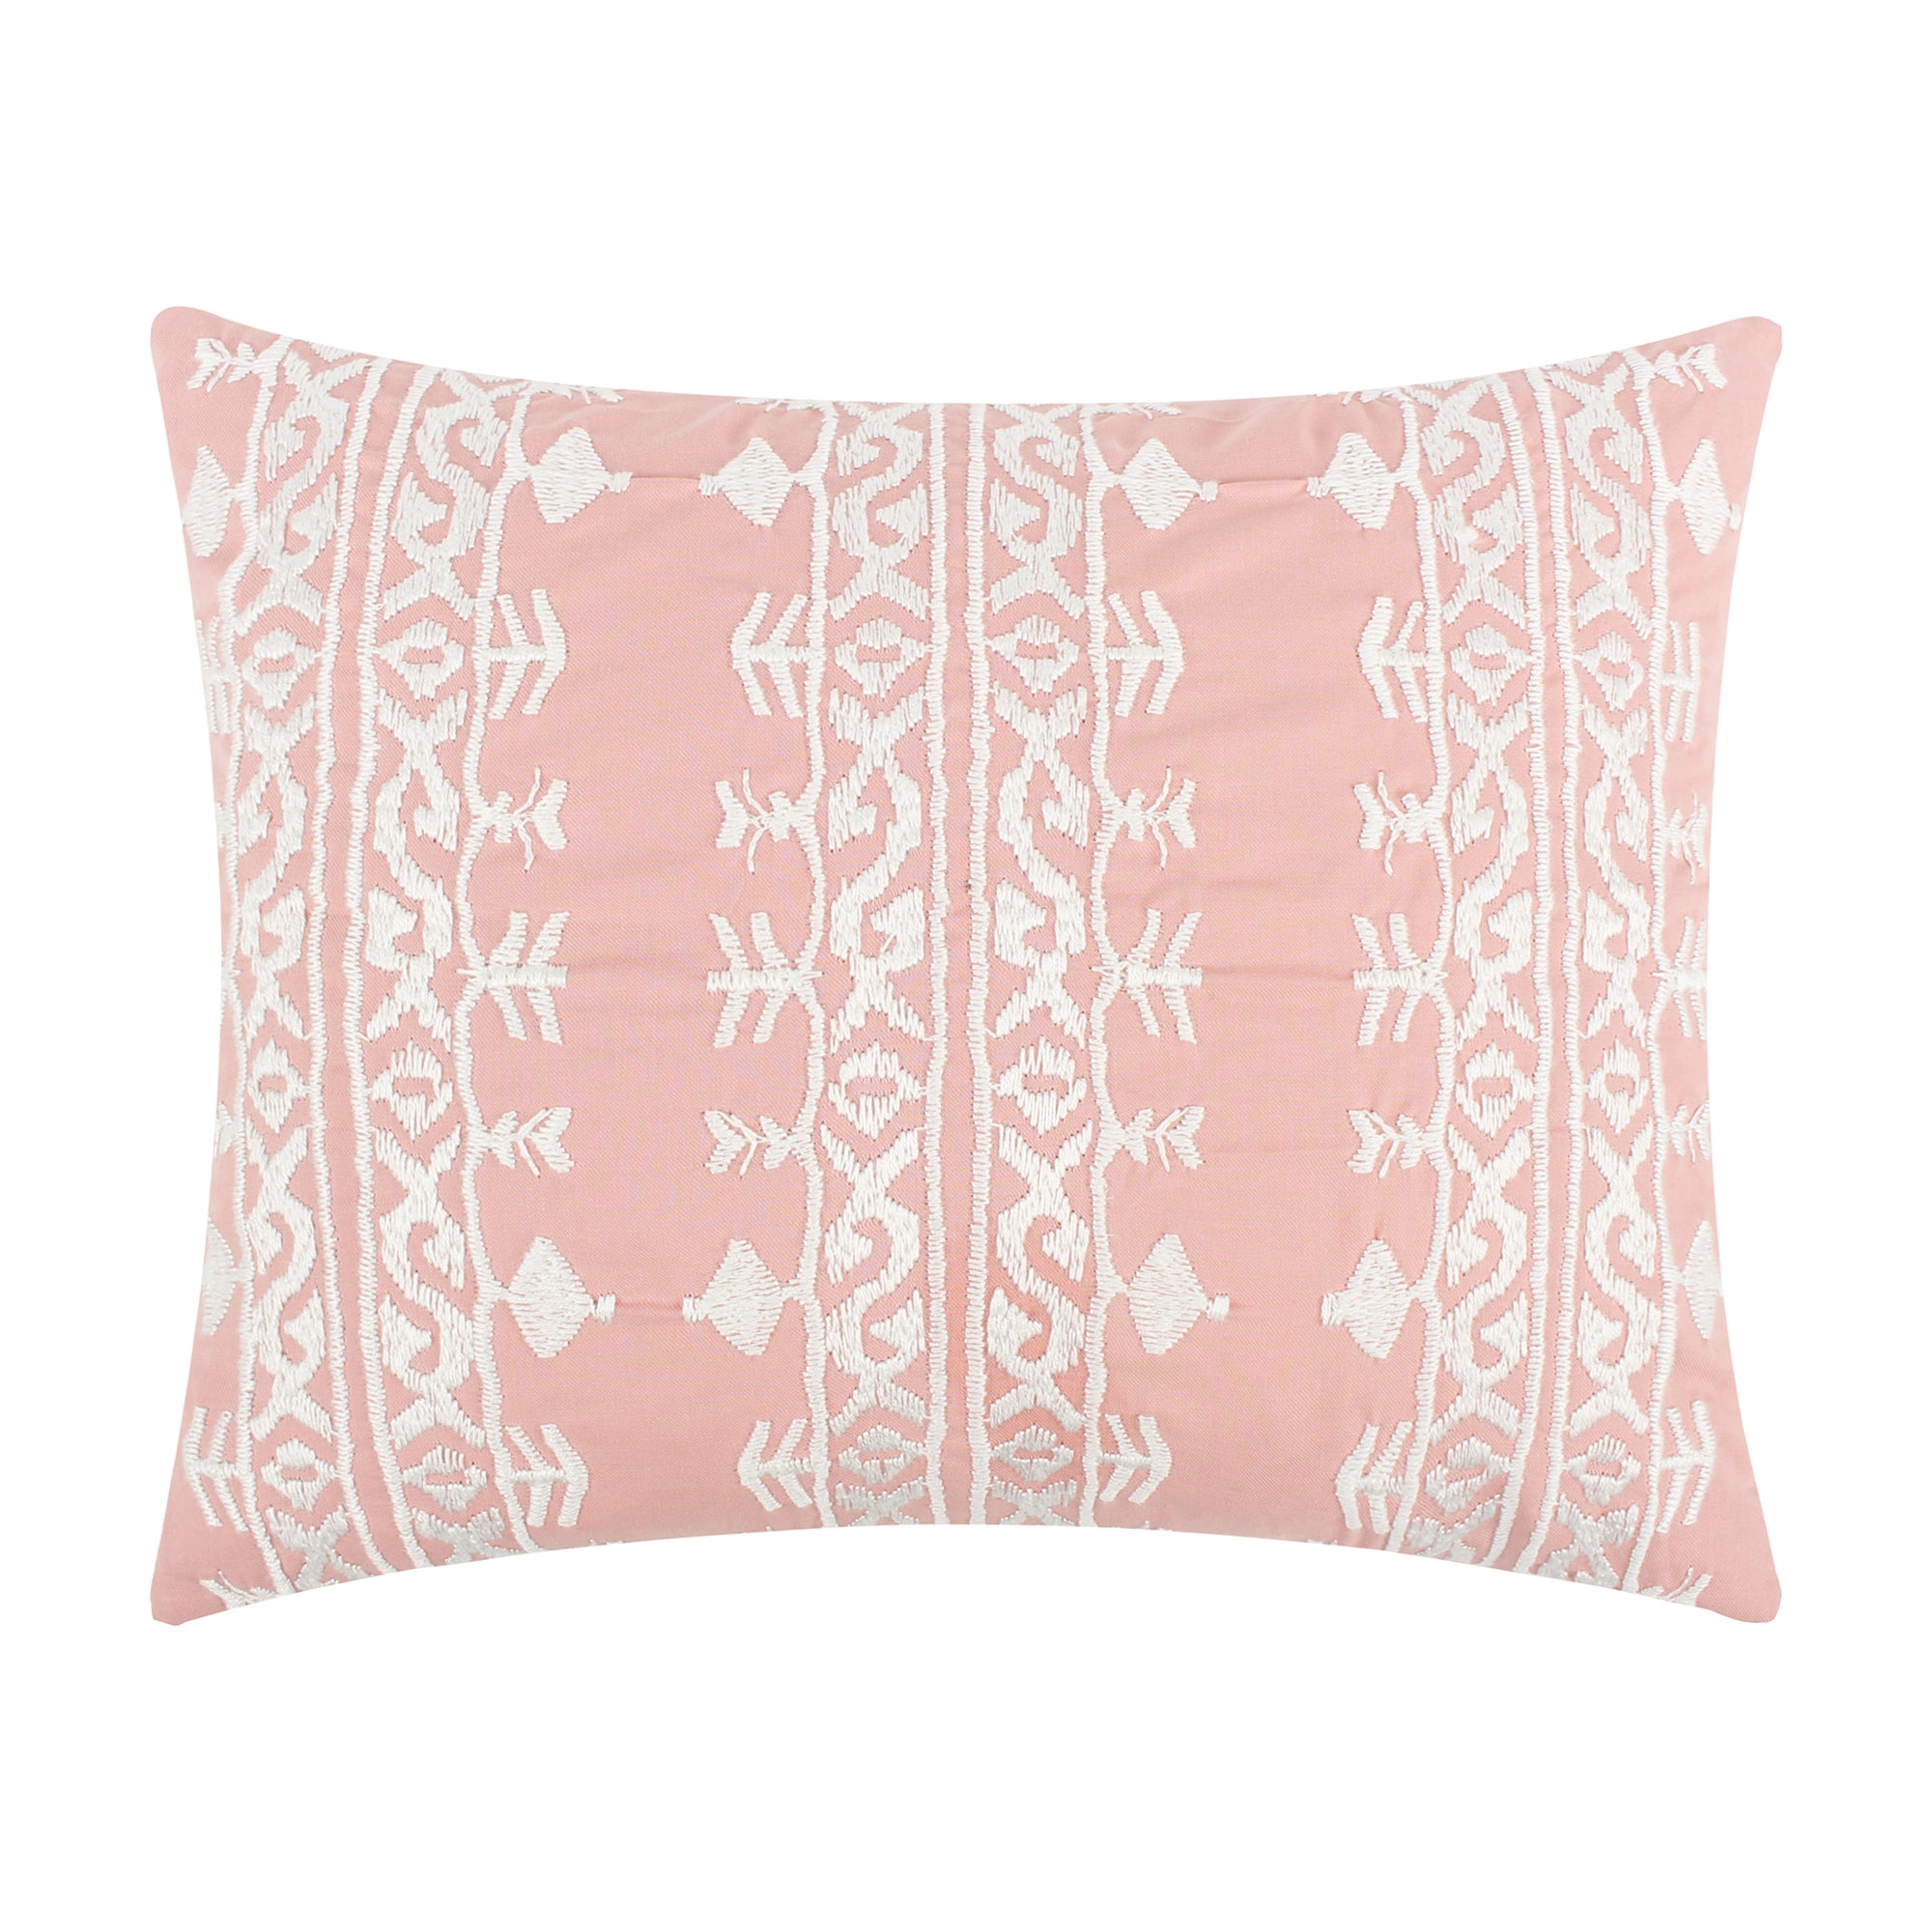 Pickford Blush Embroidered Blush Pillow